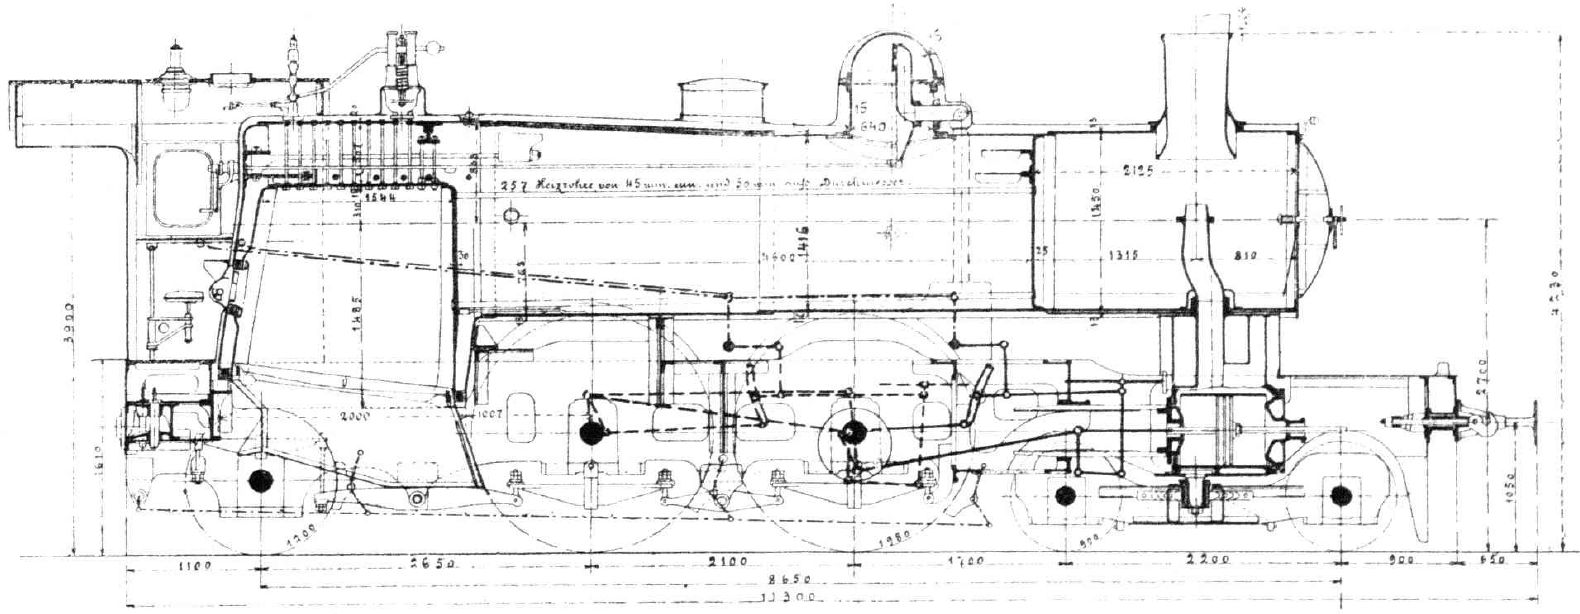 Sectional drawing of the De Glehn type with a wide firebox